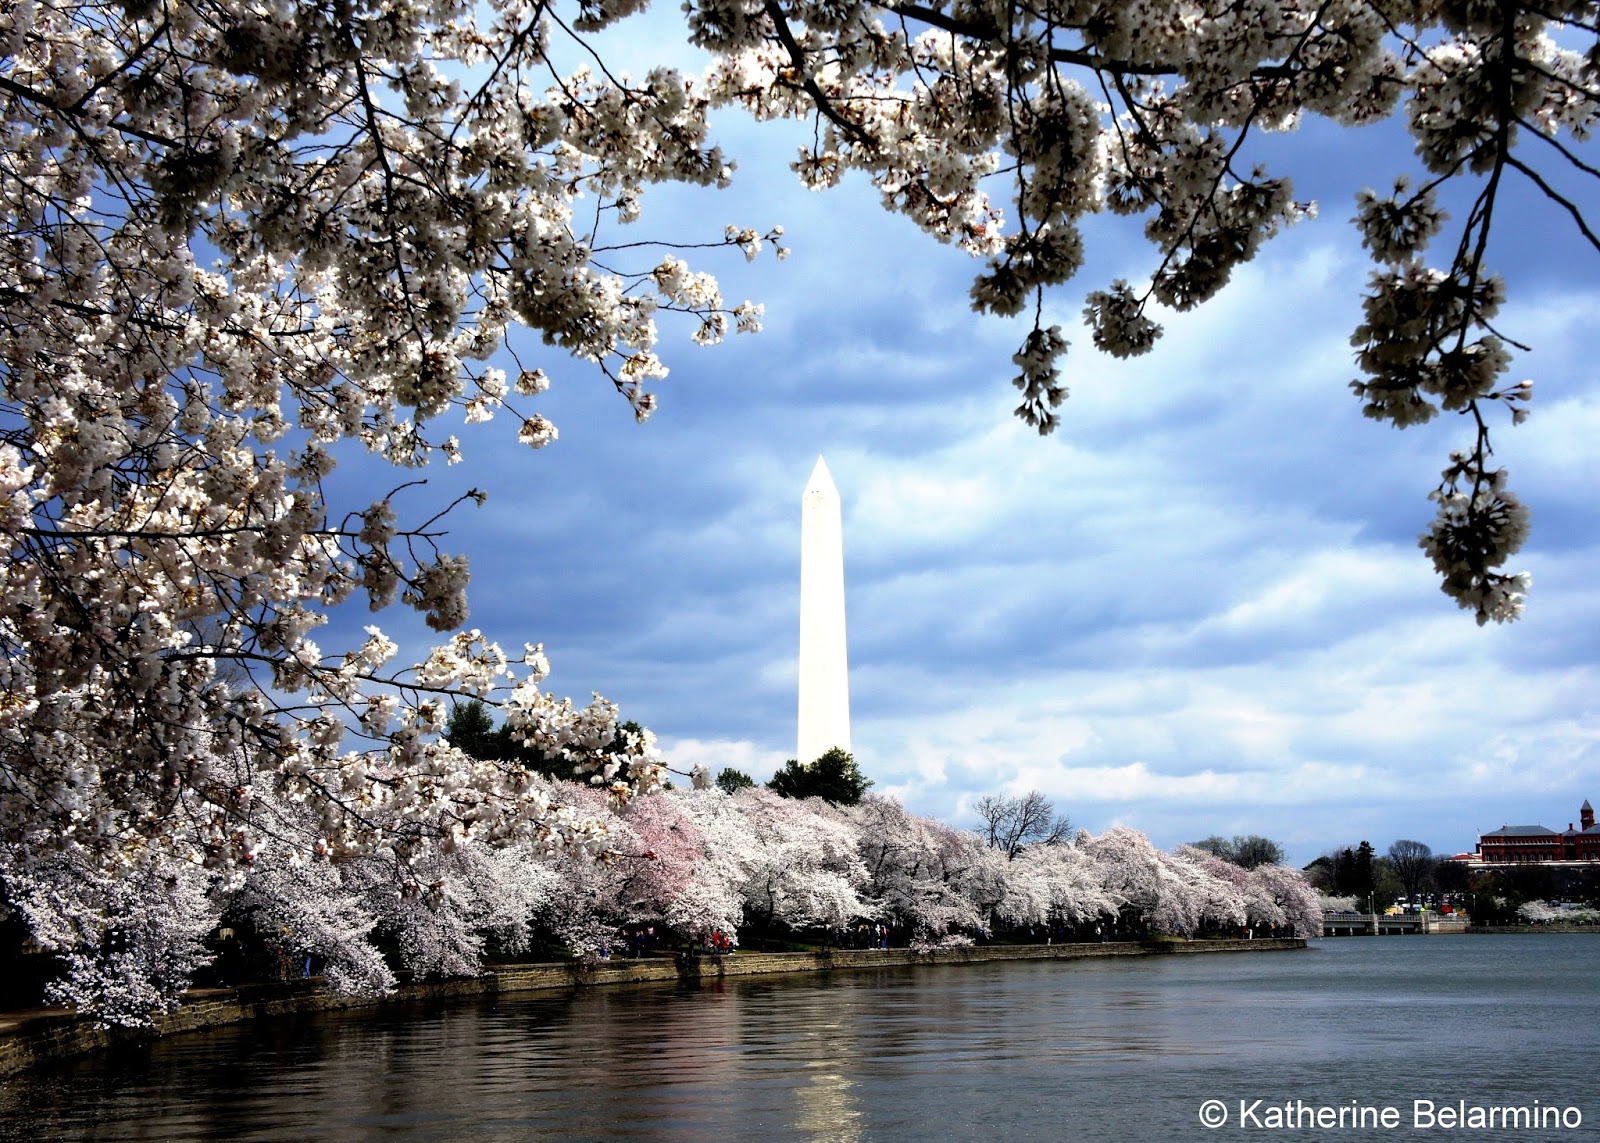 The Monuments of Washington, D.C. Under the Cherry Blossoms